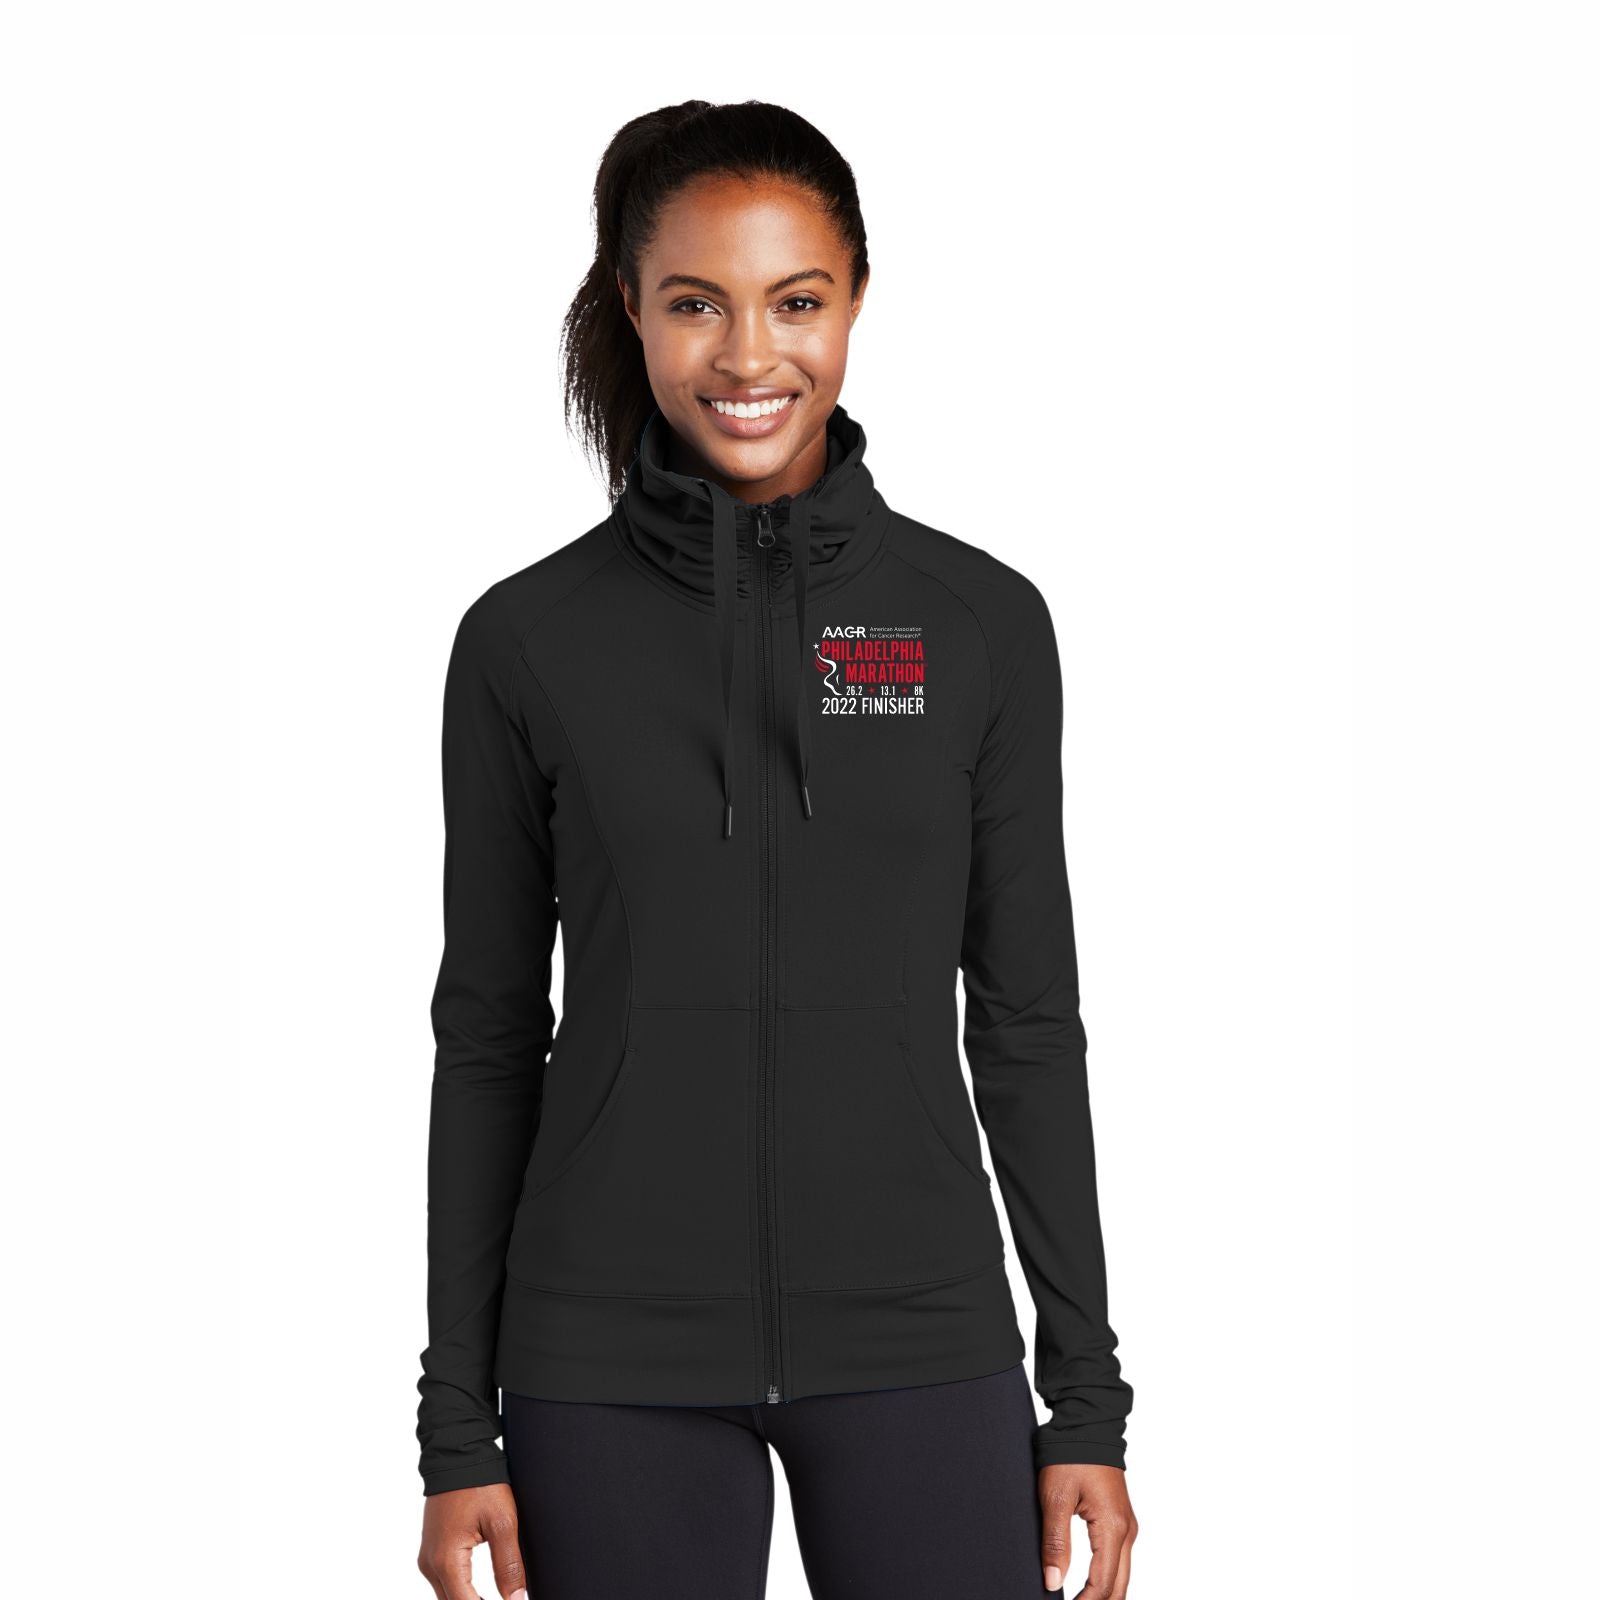 Women's Cowl Stretch Zip Jacket -Black- AACR 2022 Finisher Embroidery